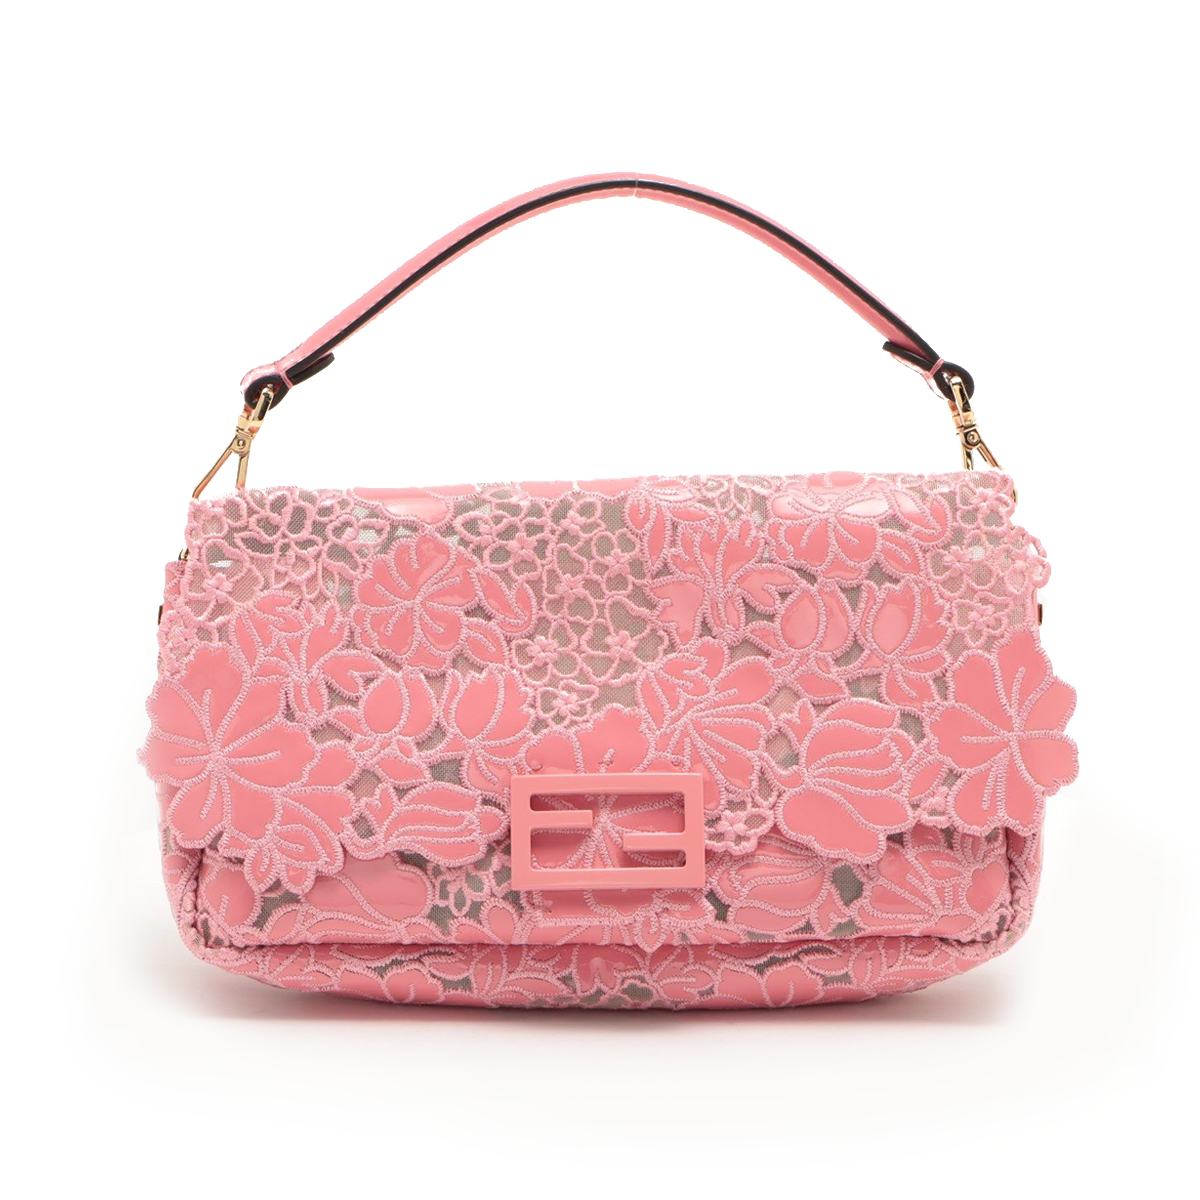 FENDI Fendi Baguette RARE SS21 Embroidered Lace Pink Patent Leather - Vault 55